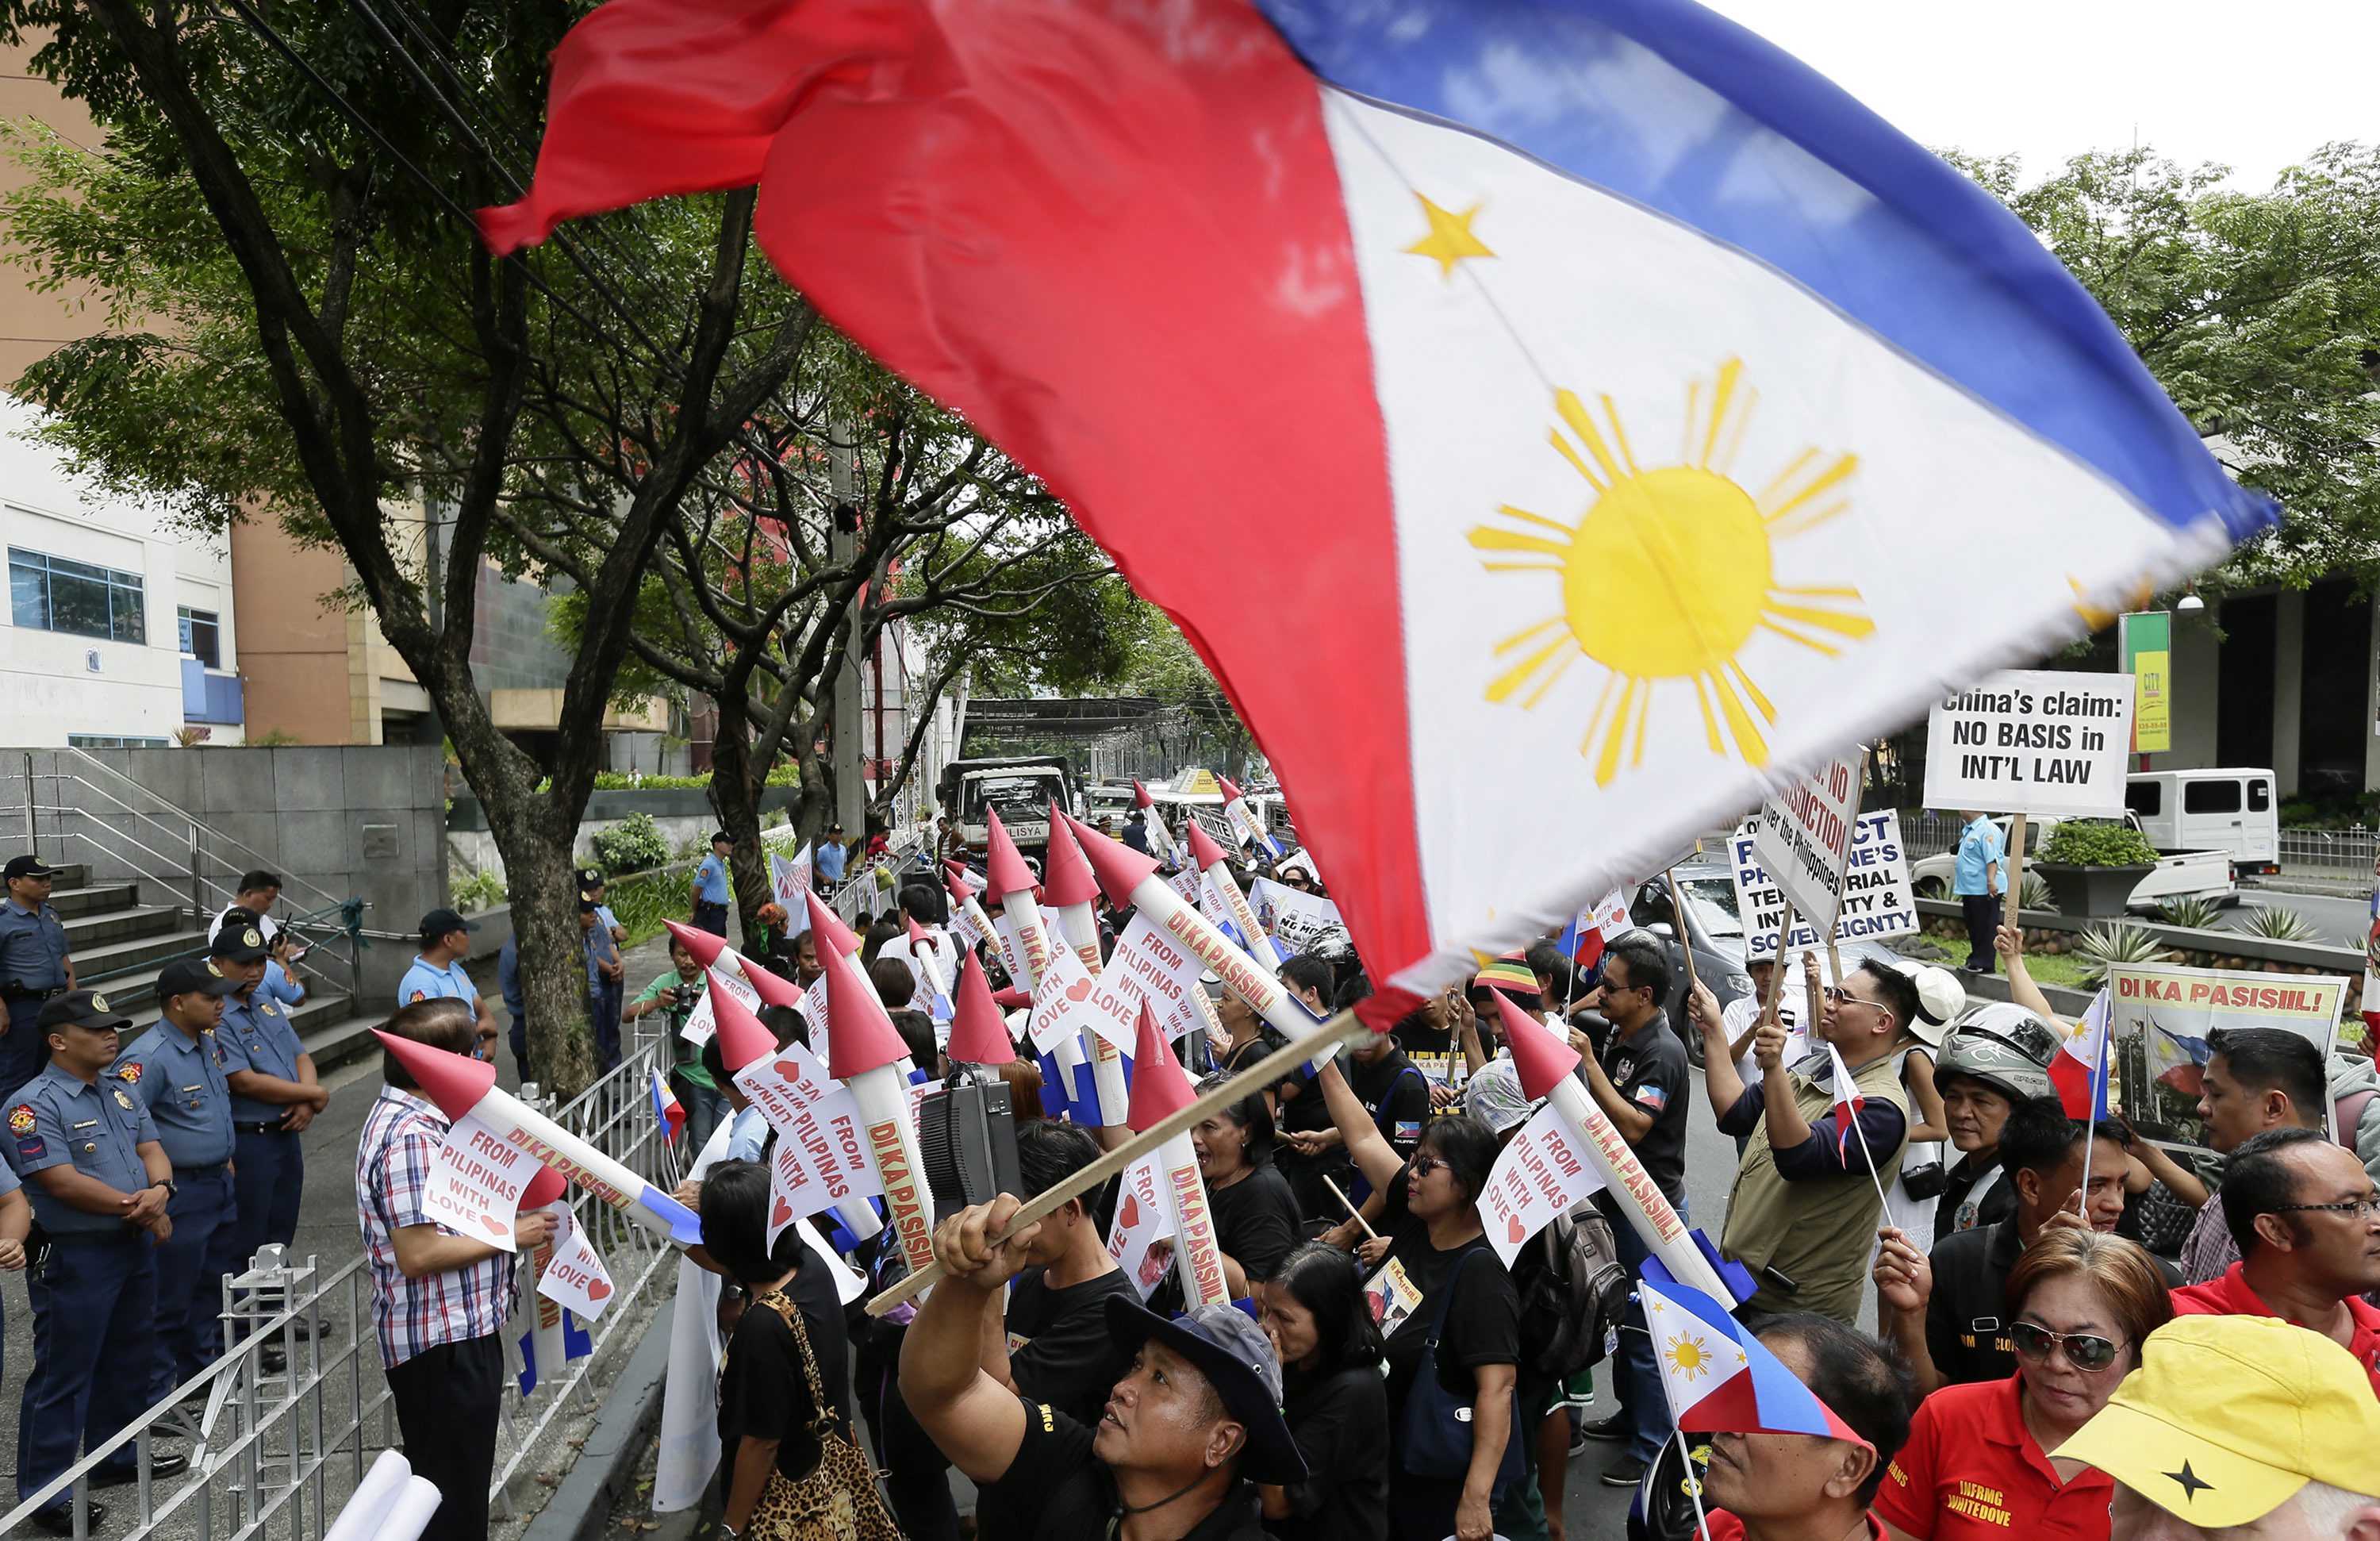 A Filipino activist waves a national flag while women brandish mock missiles as they shout anti-China slogans as part of a protest against Chinese aggression in Manila's financial district on Thursday. Photo: EPA